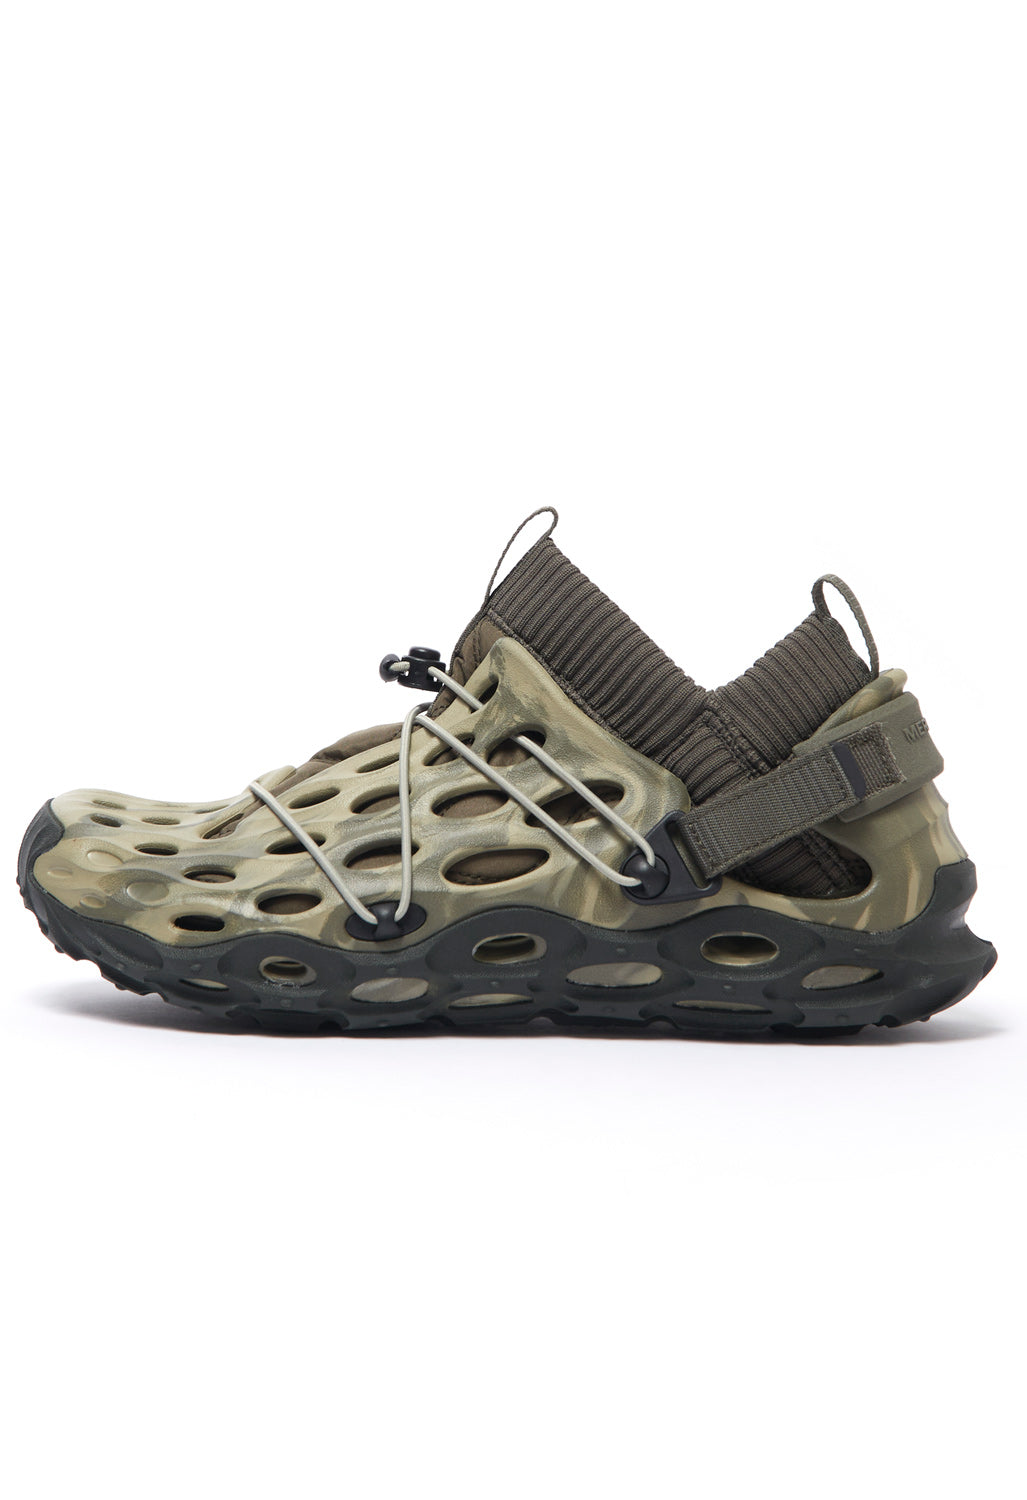 Merrell Hydro Moc AT Ripstop 1TRL Men's Shoes 3